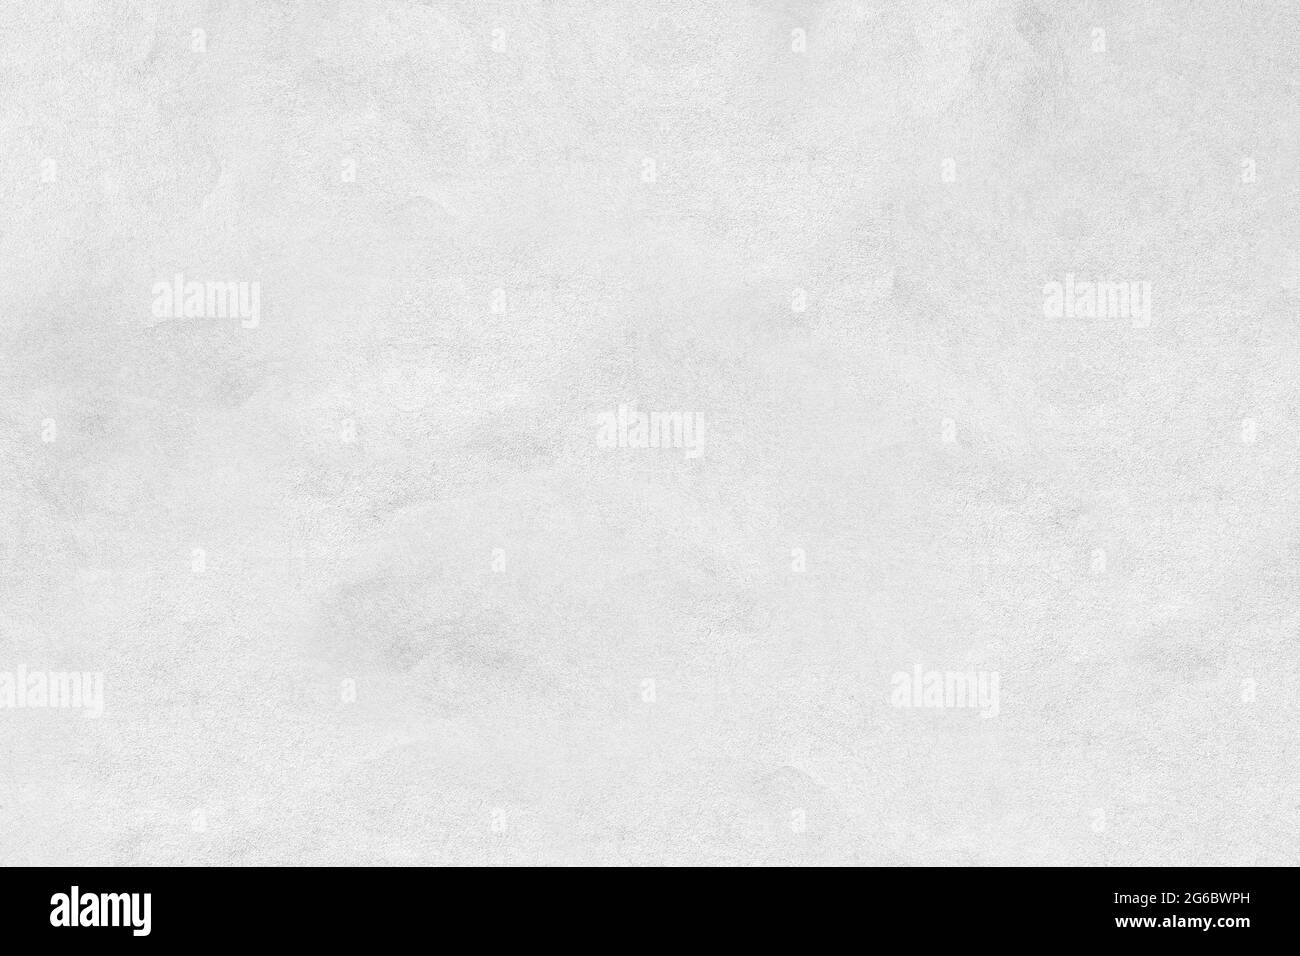 Textured rough white wall surface .Texture or Background Stock Photo ...